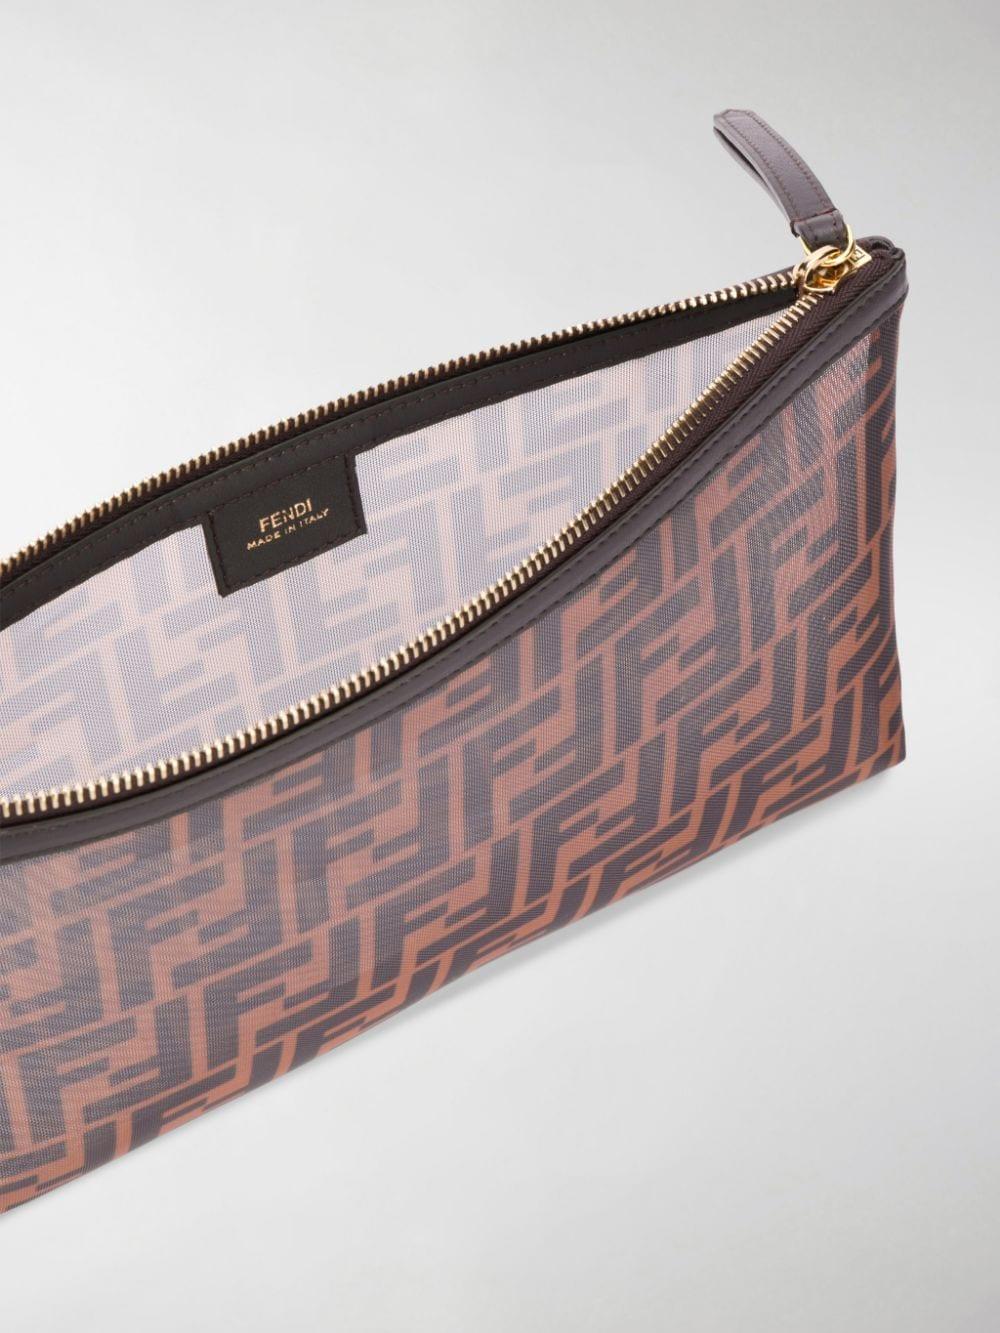 Fendi Large Ff Envelope Pouch in Brown | Lyst